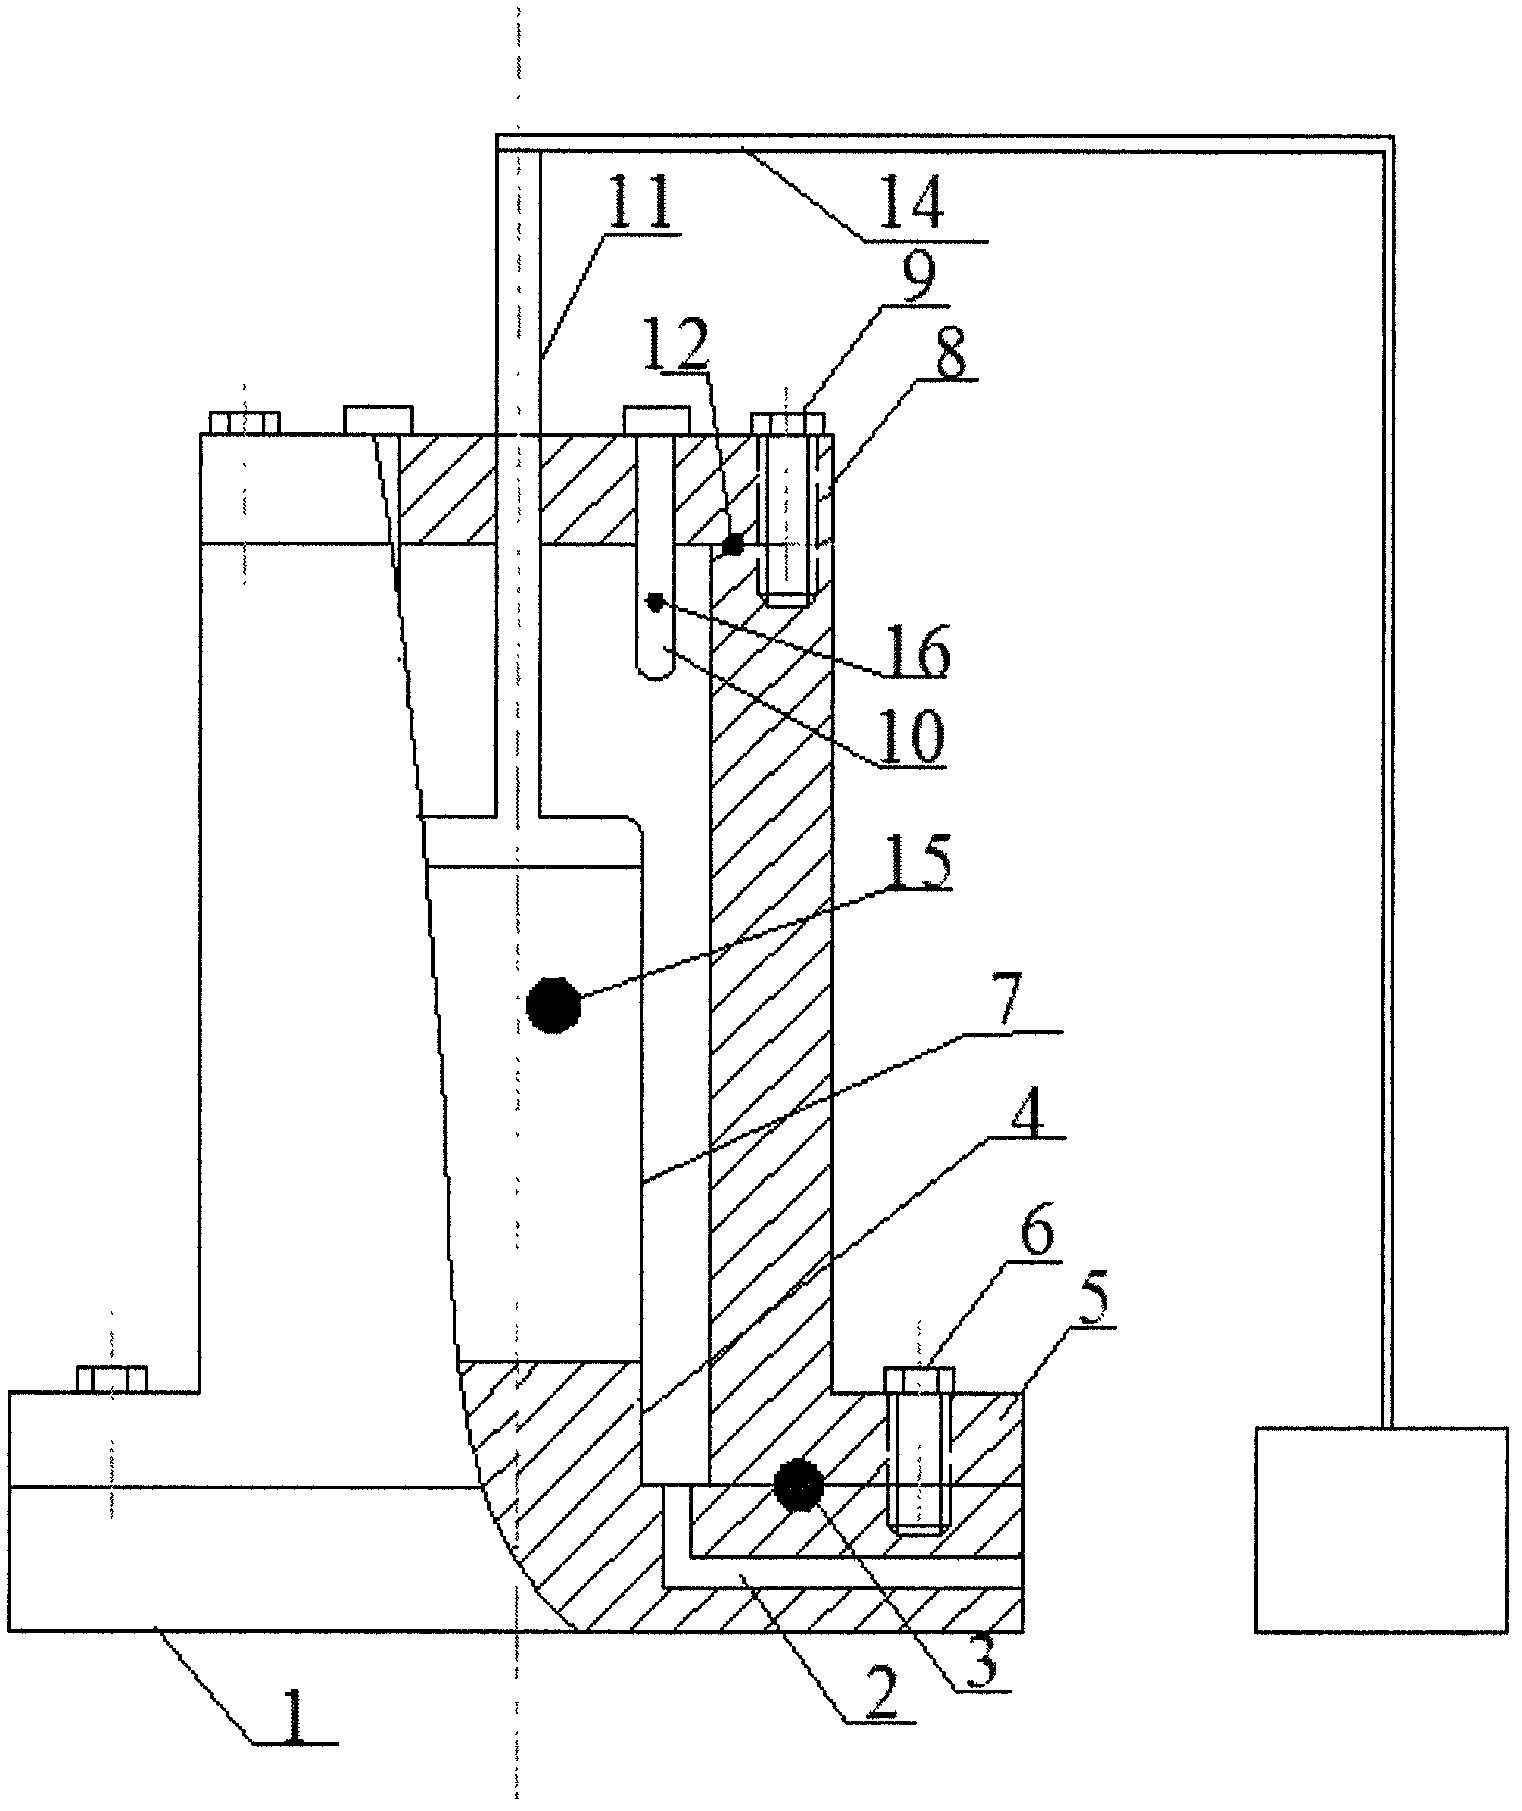 Indoor testing apparatus for thermal expansion coefficient of rock sample